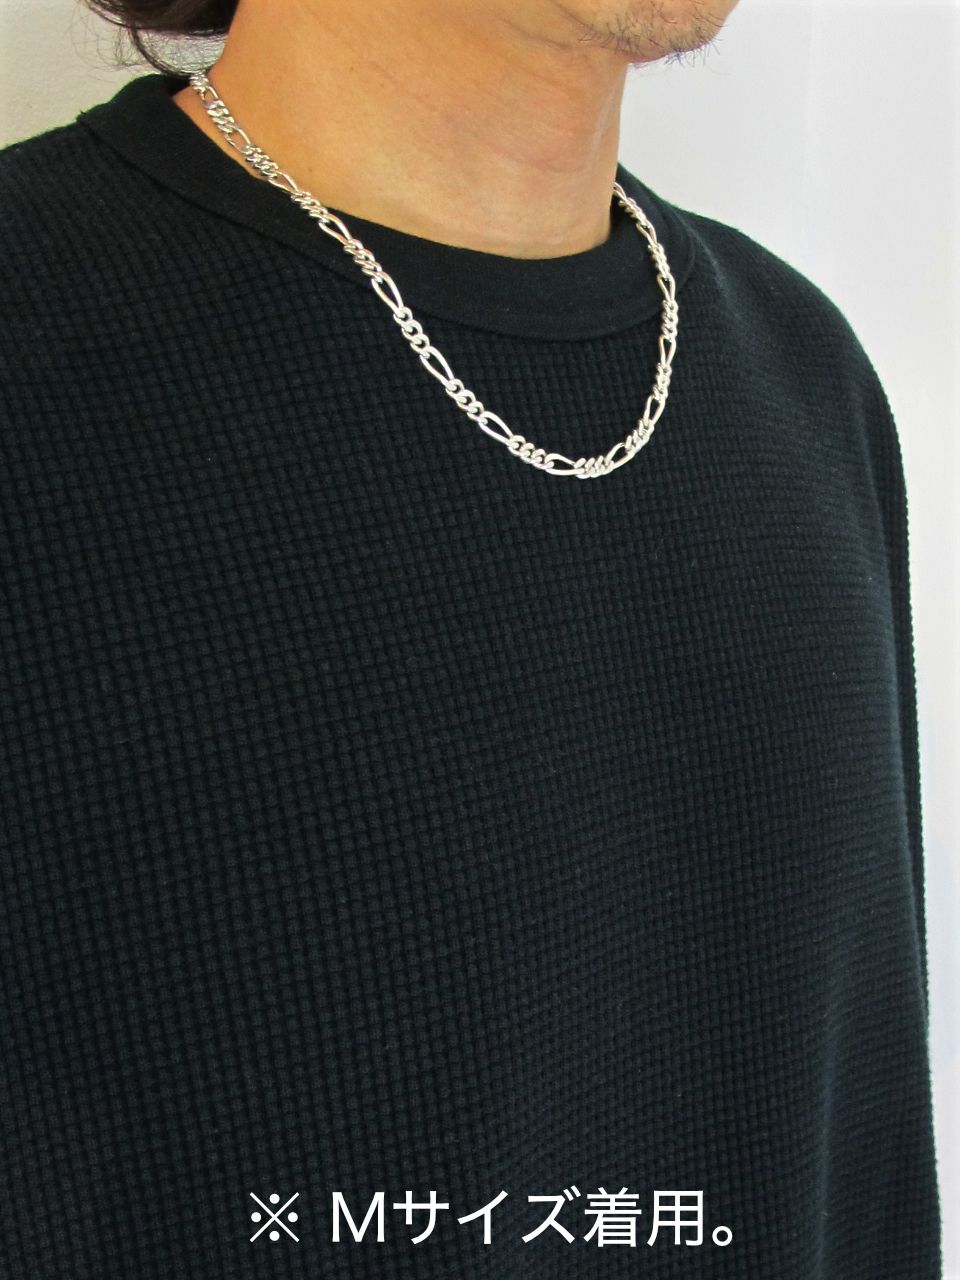 FIGARO WIDE CHAIN (SILVER) / フィガロワイドチェーンネックレス - M